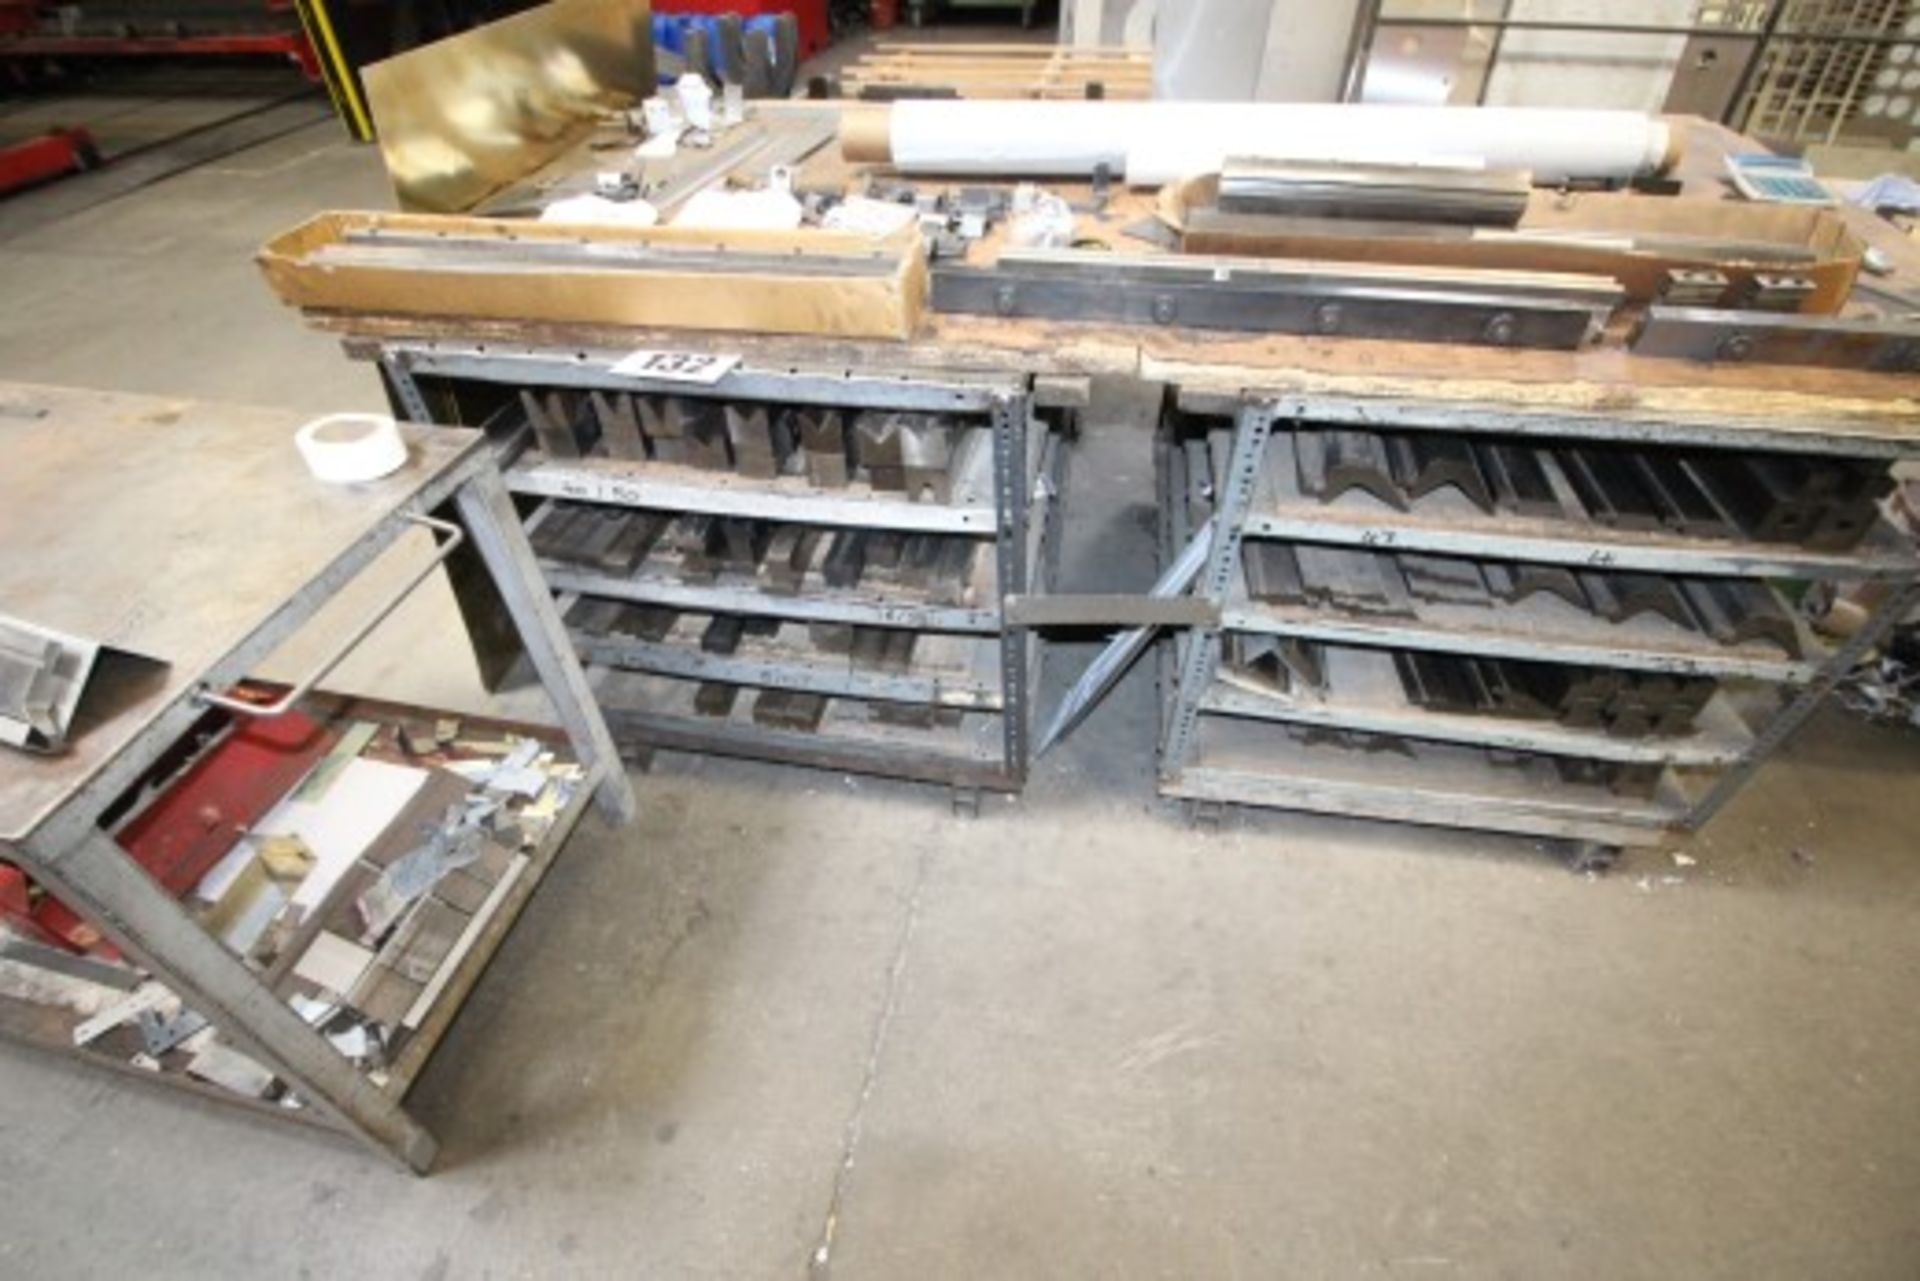 2 METAL BENCHES WITH SHELVES UNDER & CONTENTS OF PRESS BRAKE TOOLING & SEPARATE MOBILE TROLLEY 36" x